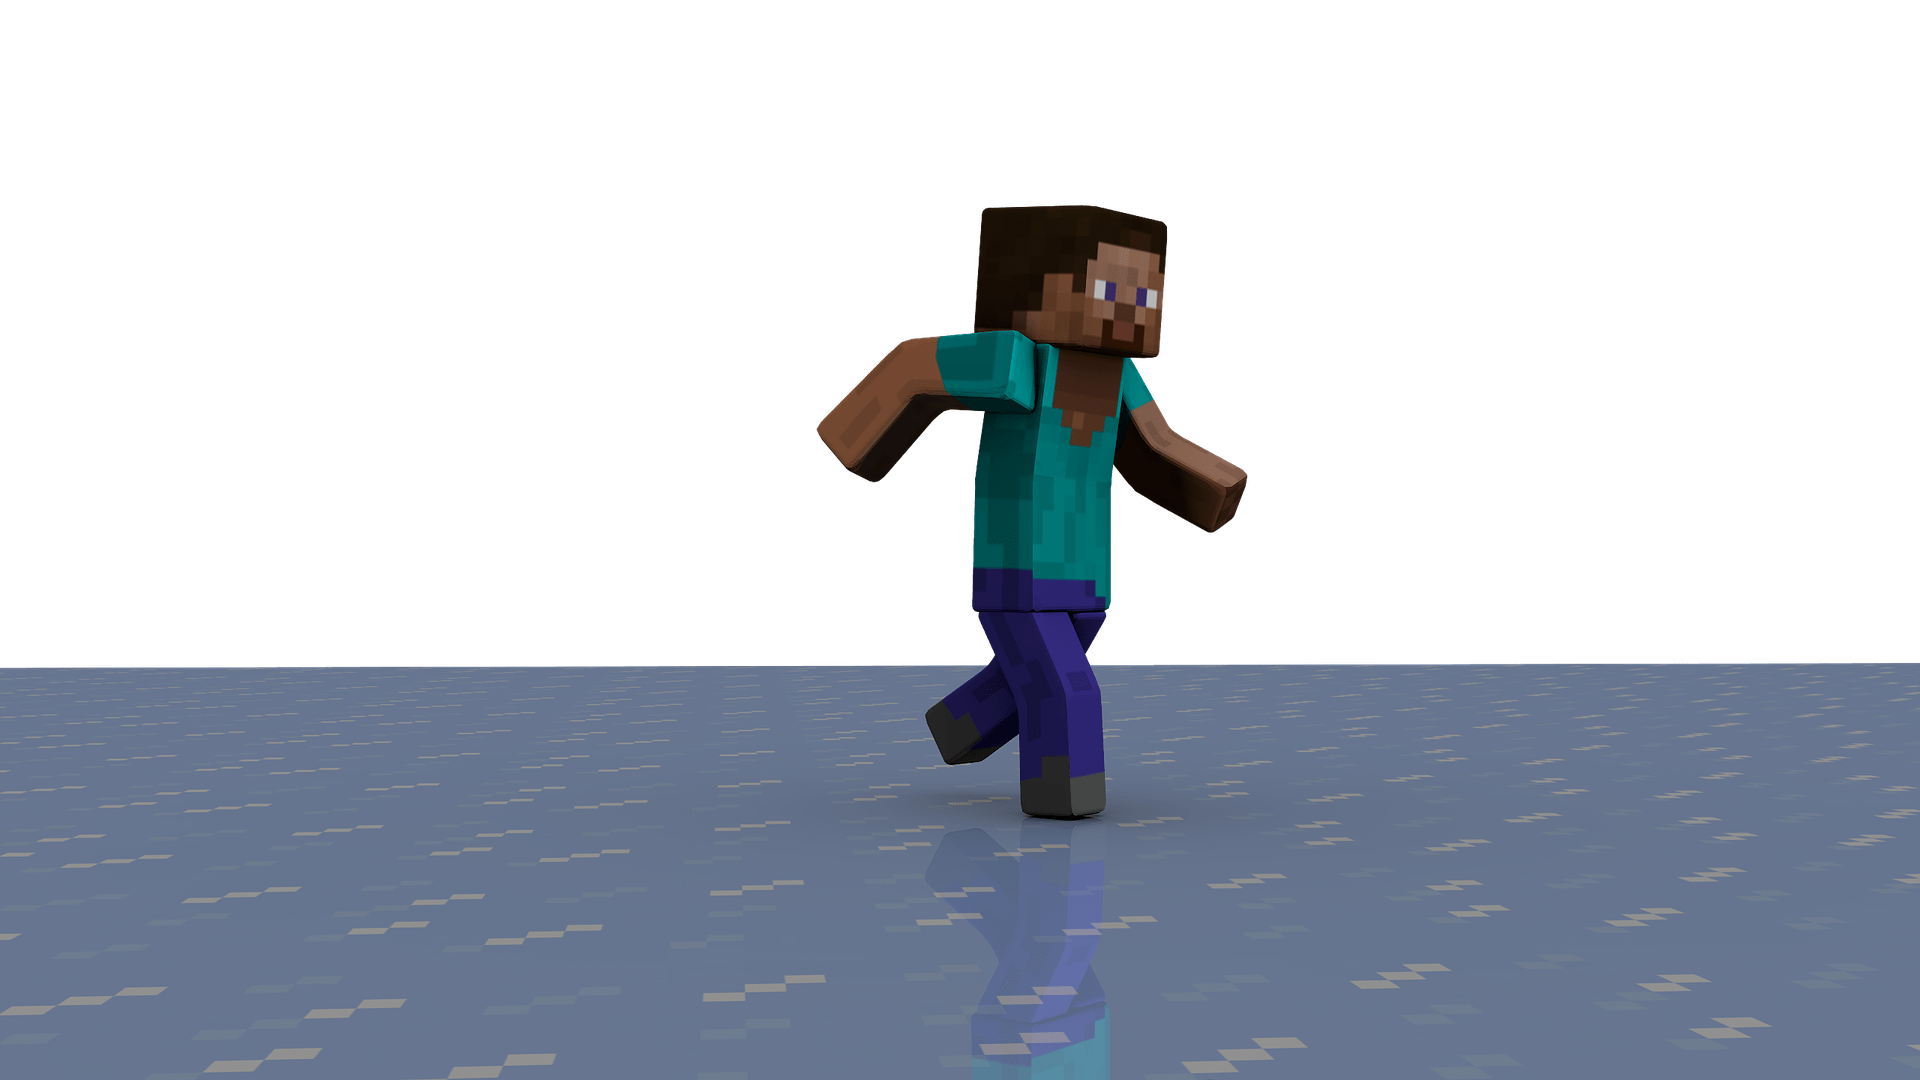 How To Shade Minecraft Skins?